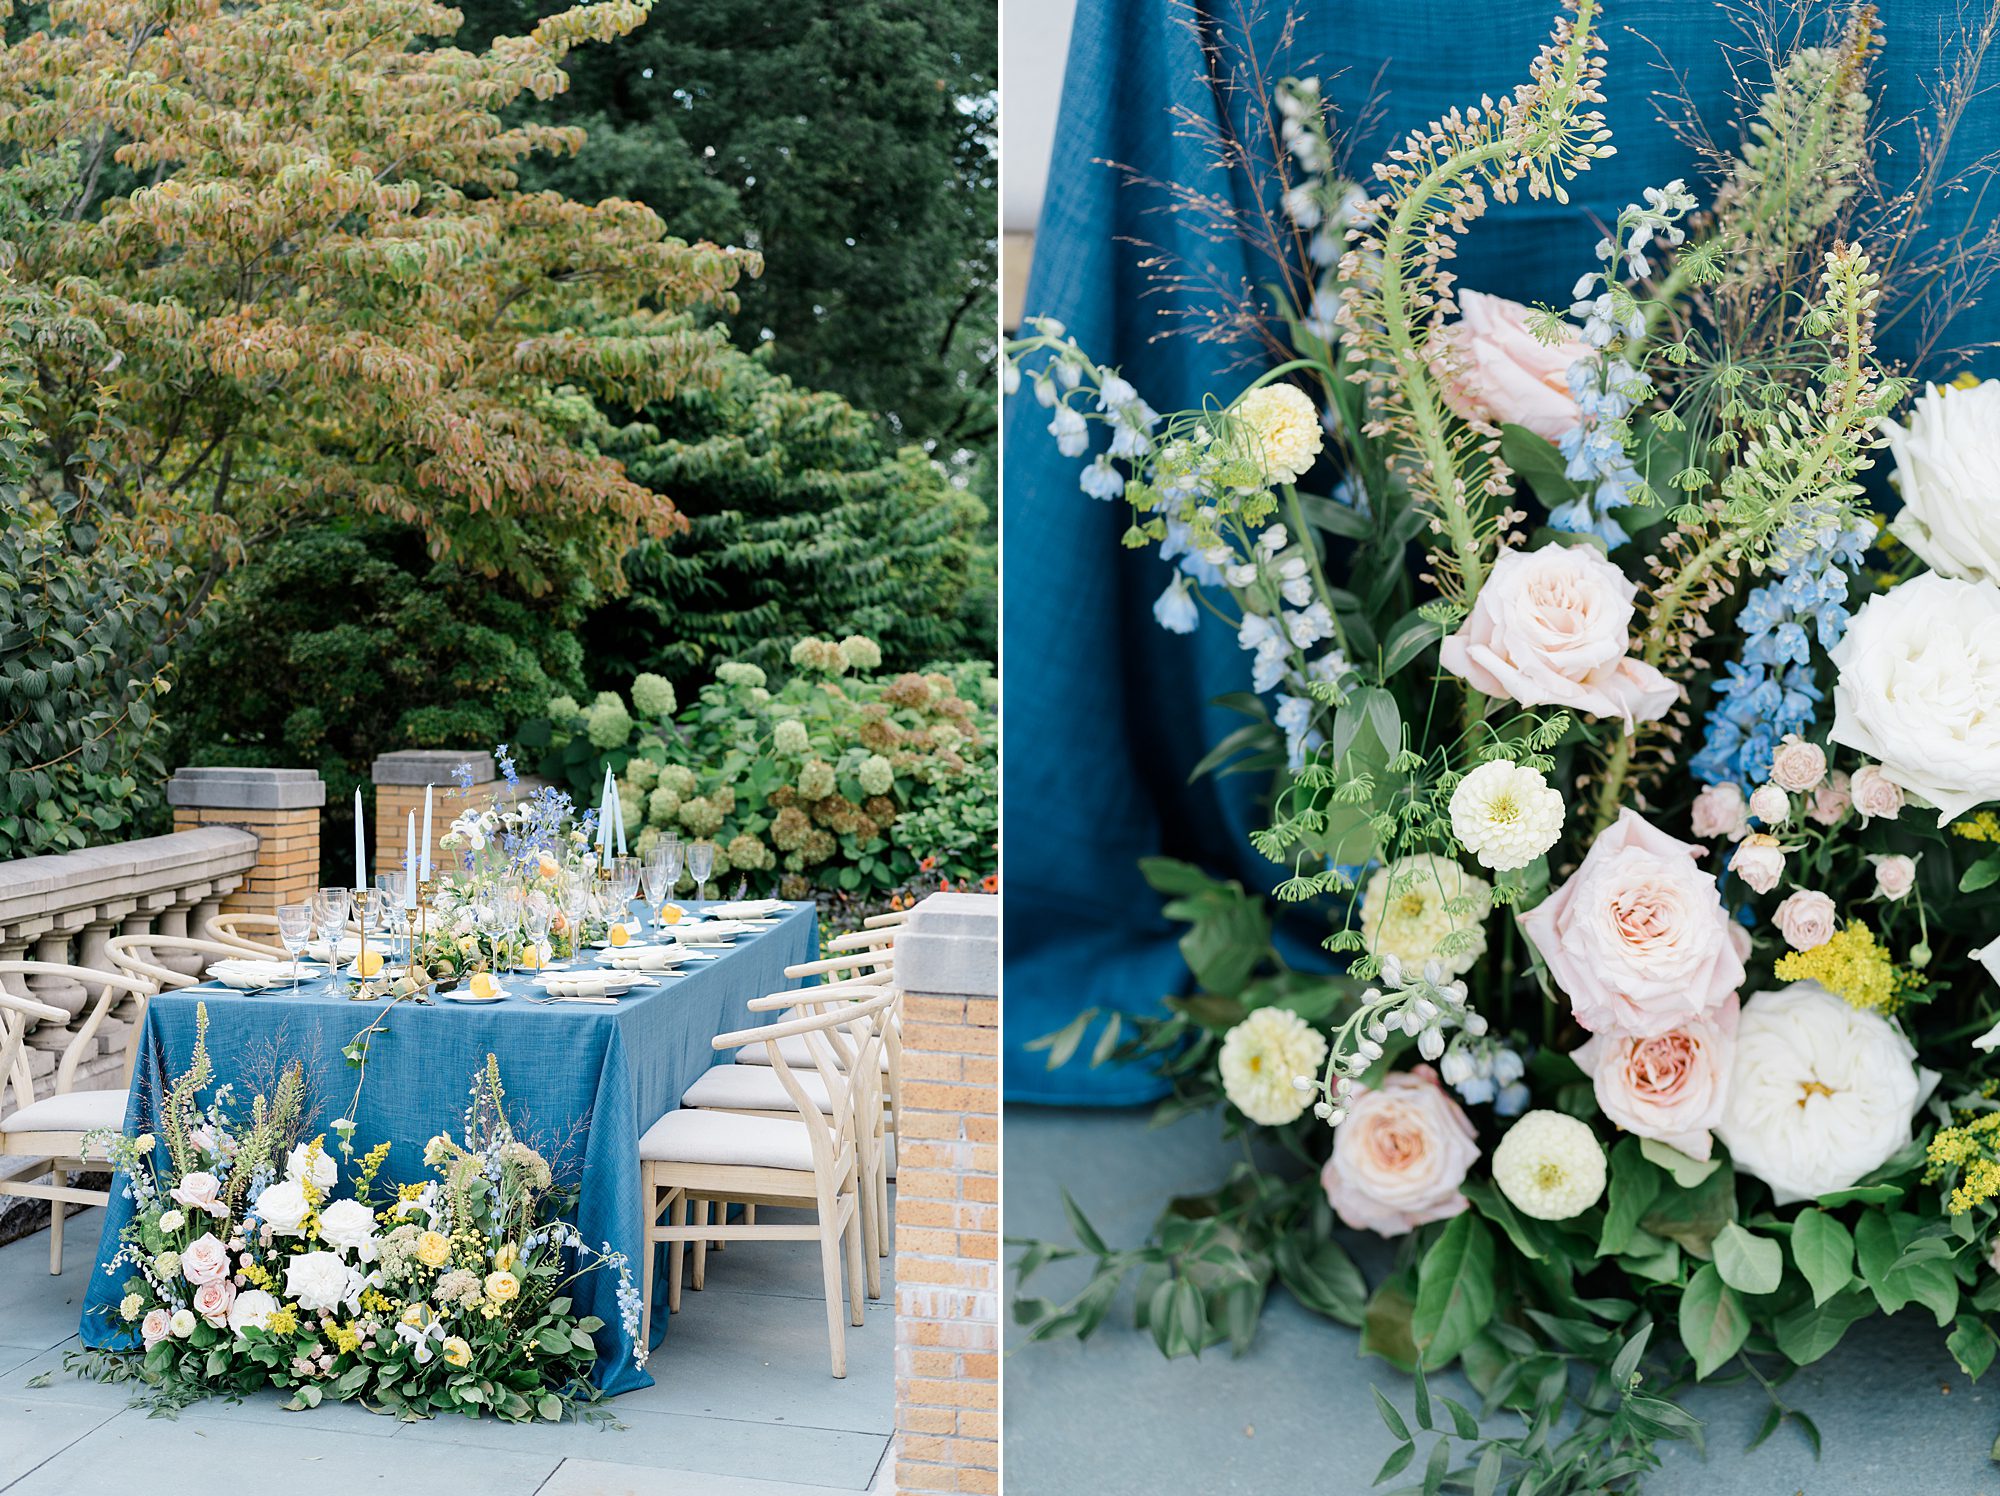 flower bouquets line the edge of tables at Cairnwood Estate wedding